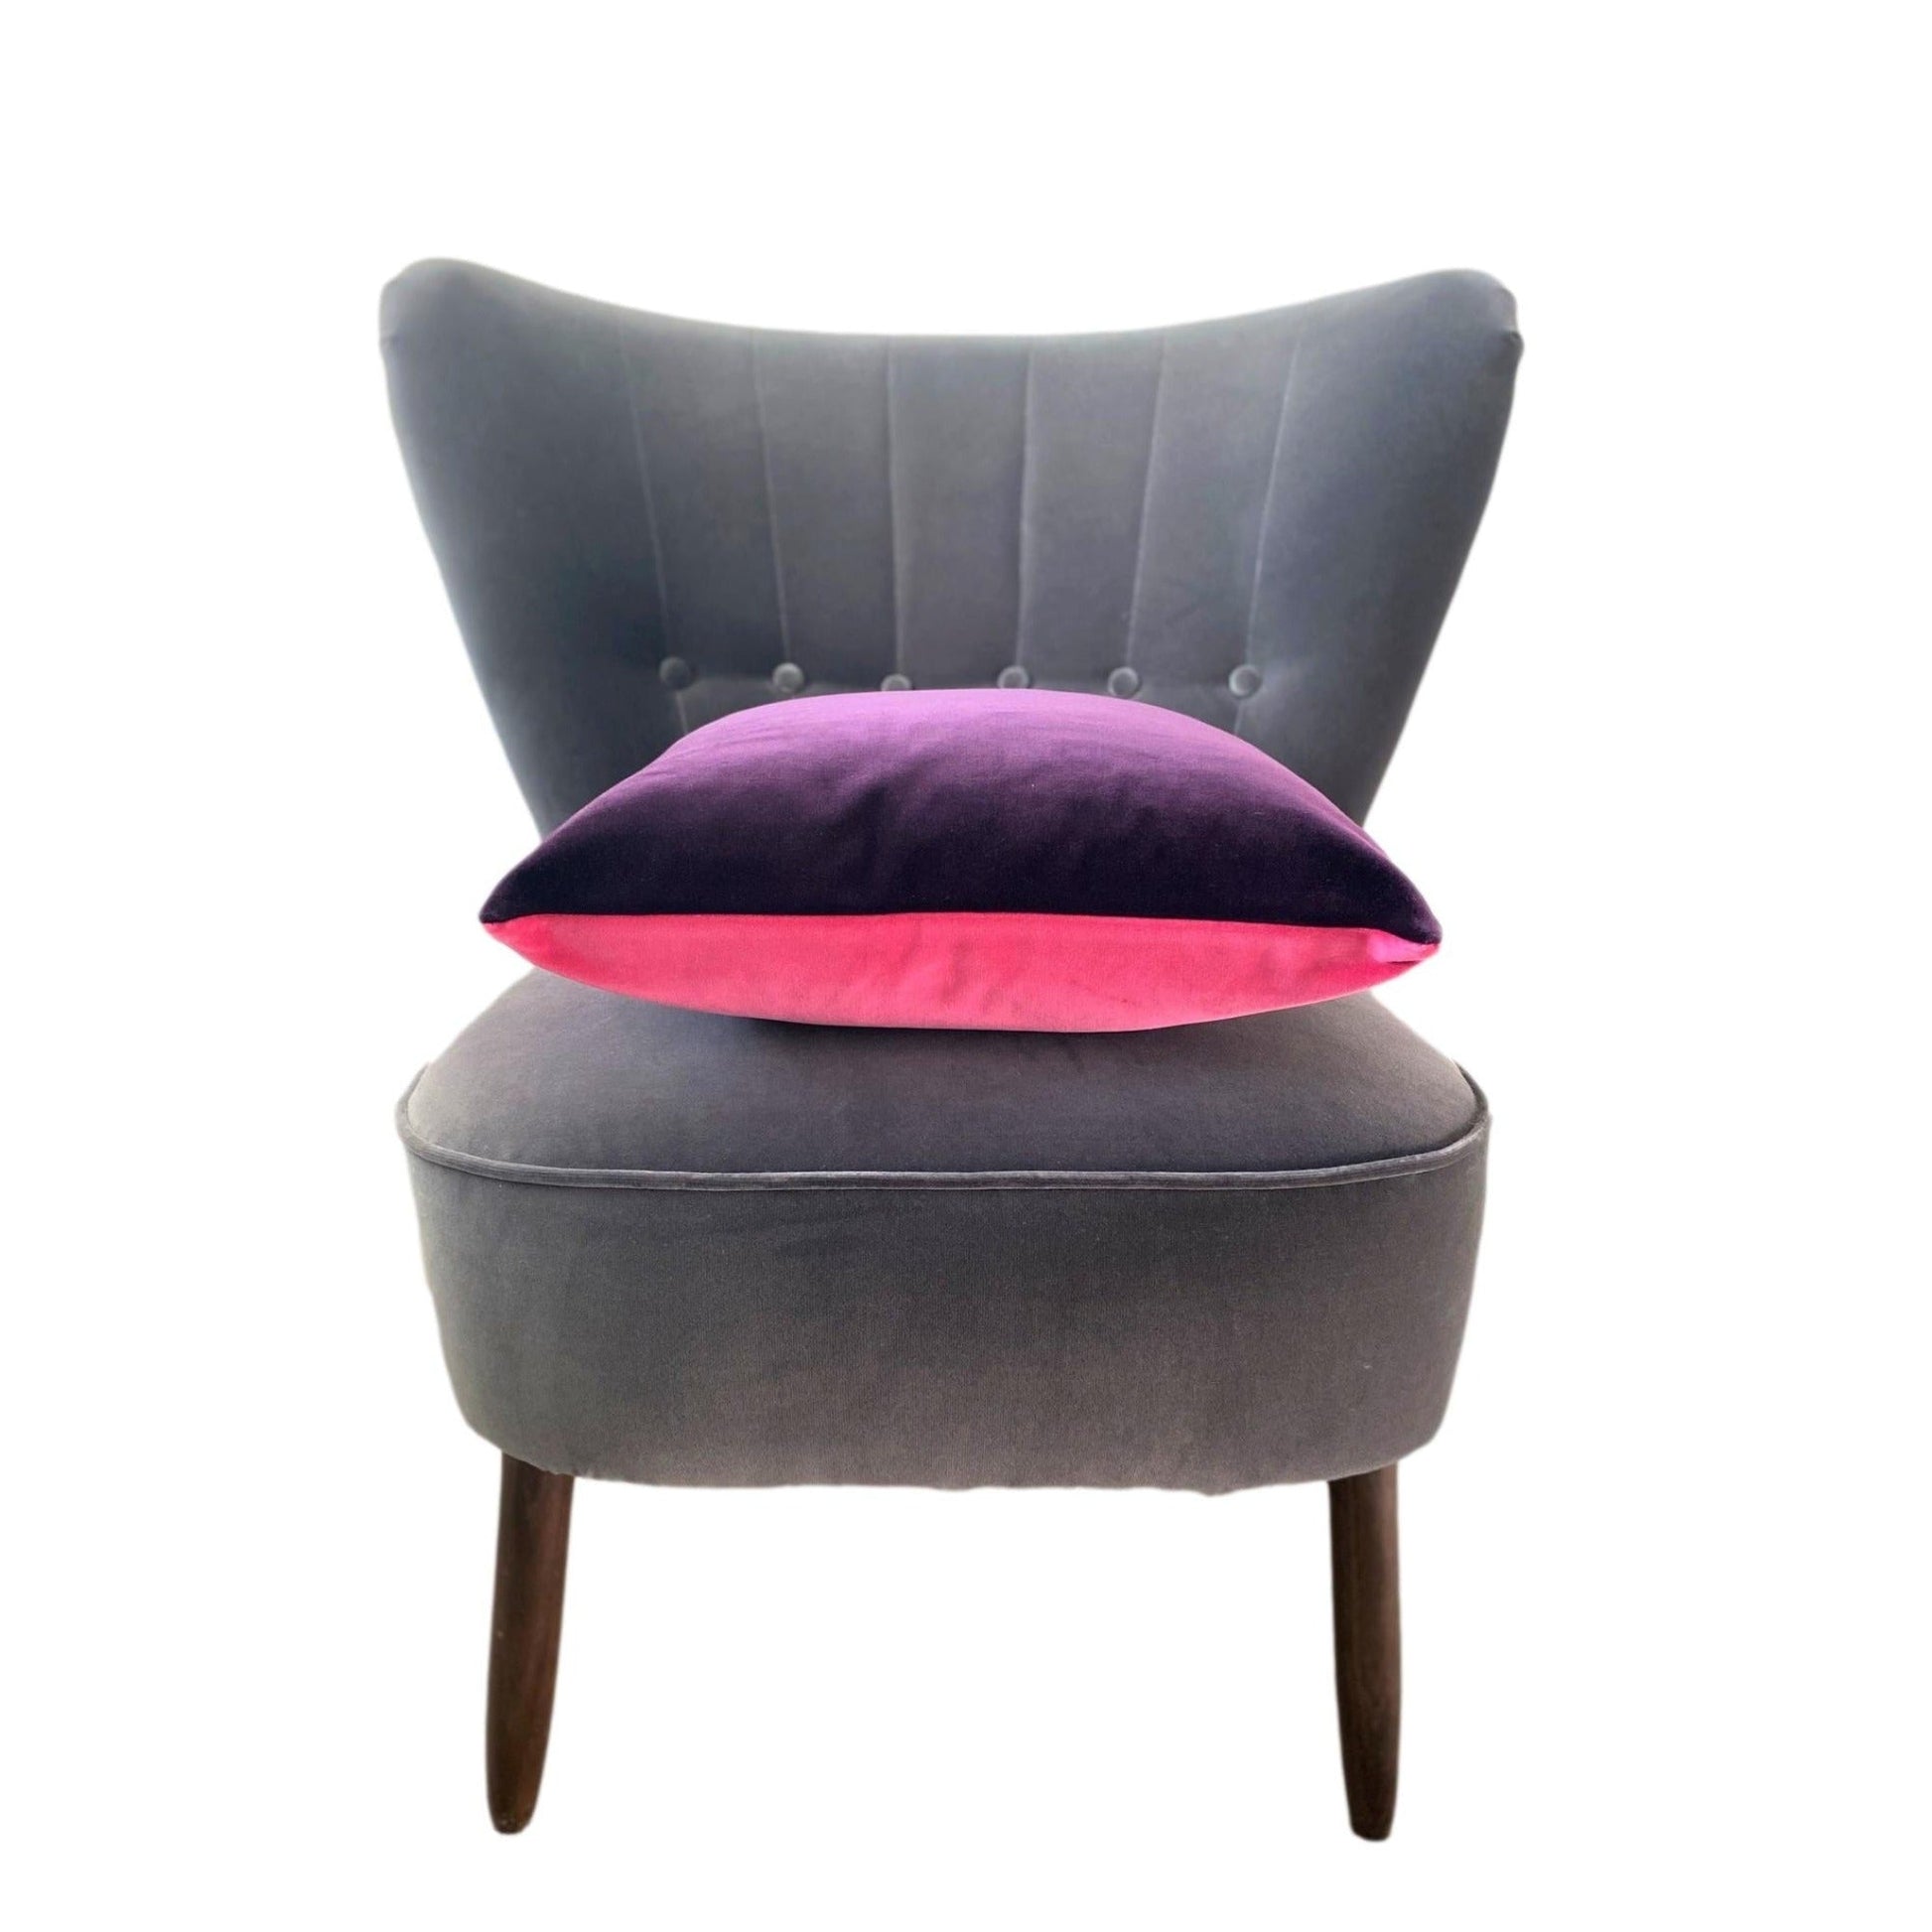 large-purple-cushions-luxe-39